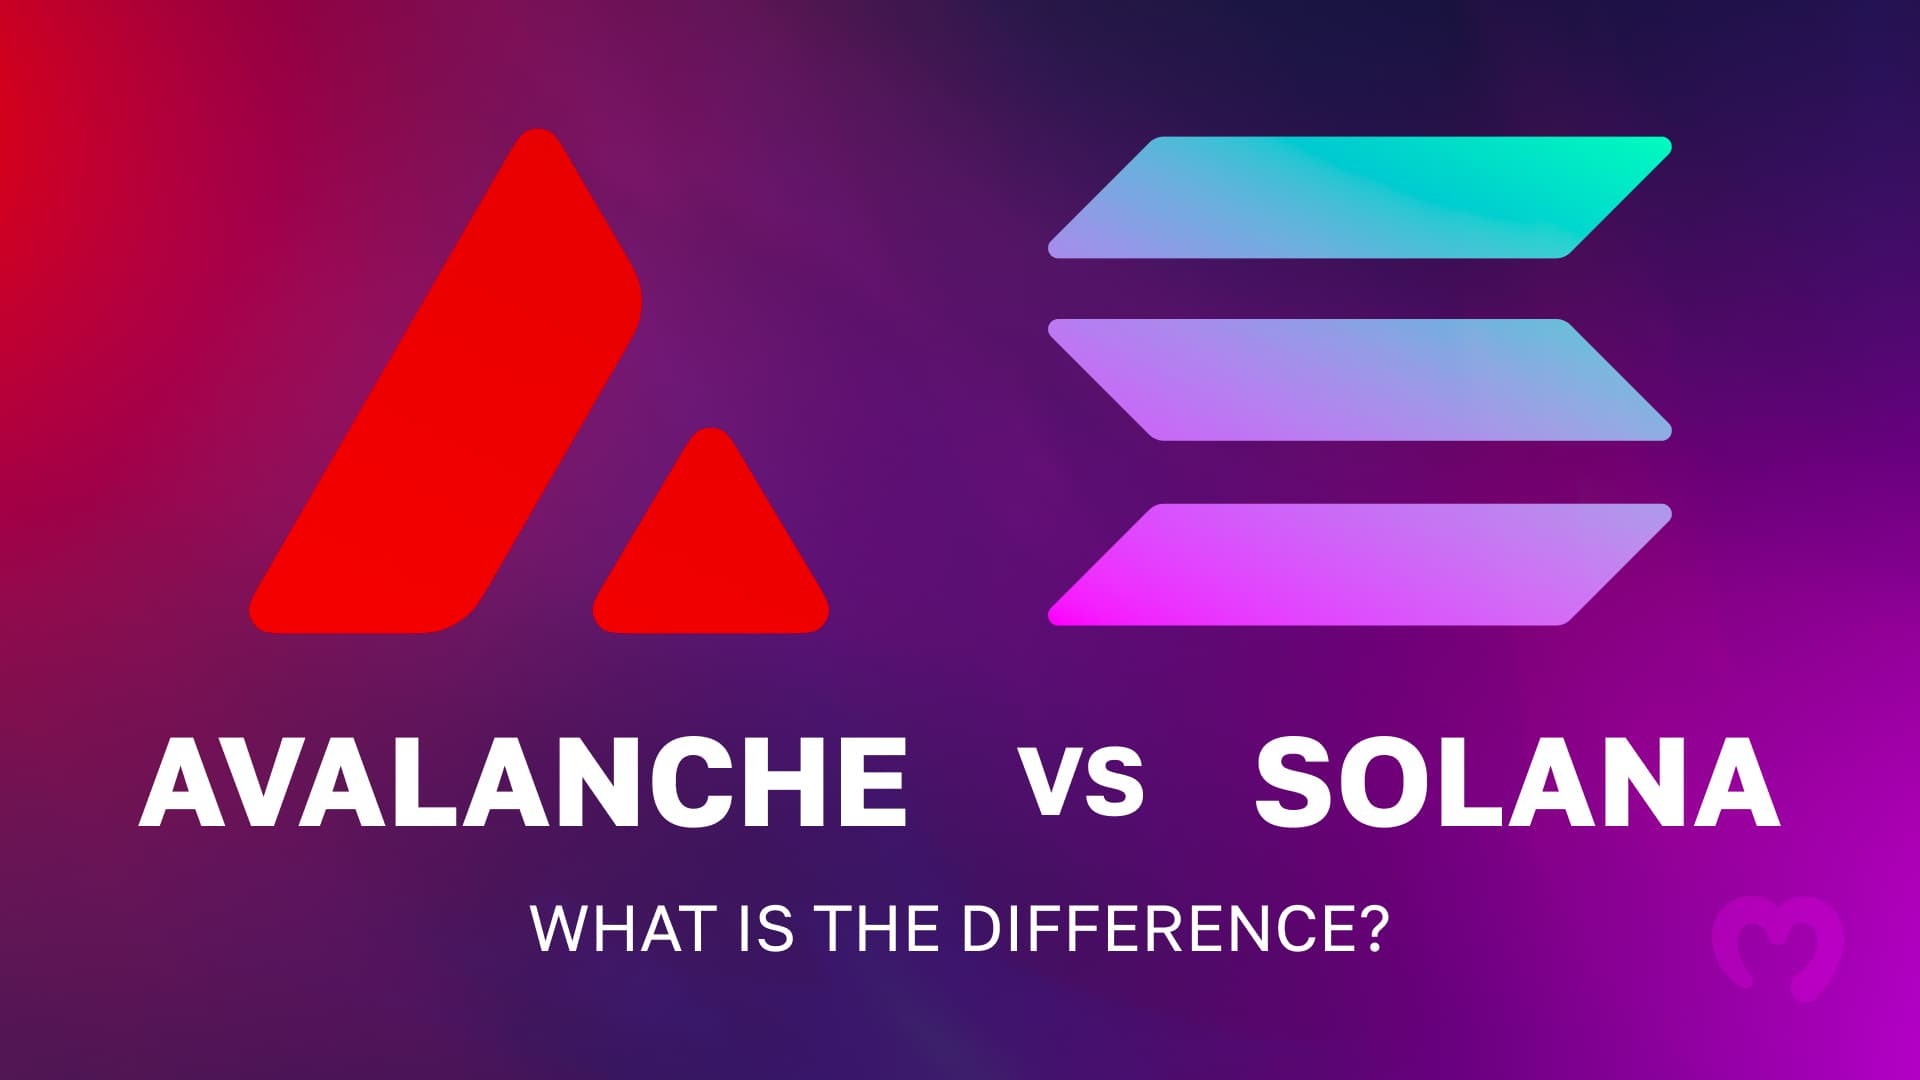 23_01_Avalanche-vs-Solana-What-is-the-Difference-